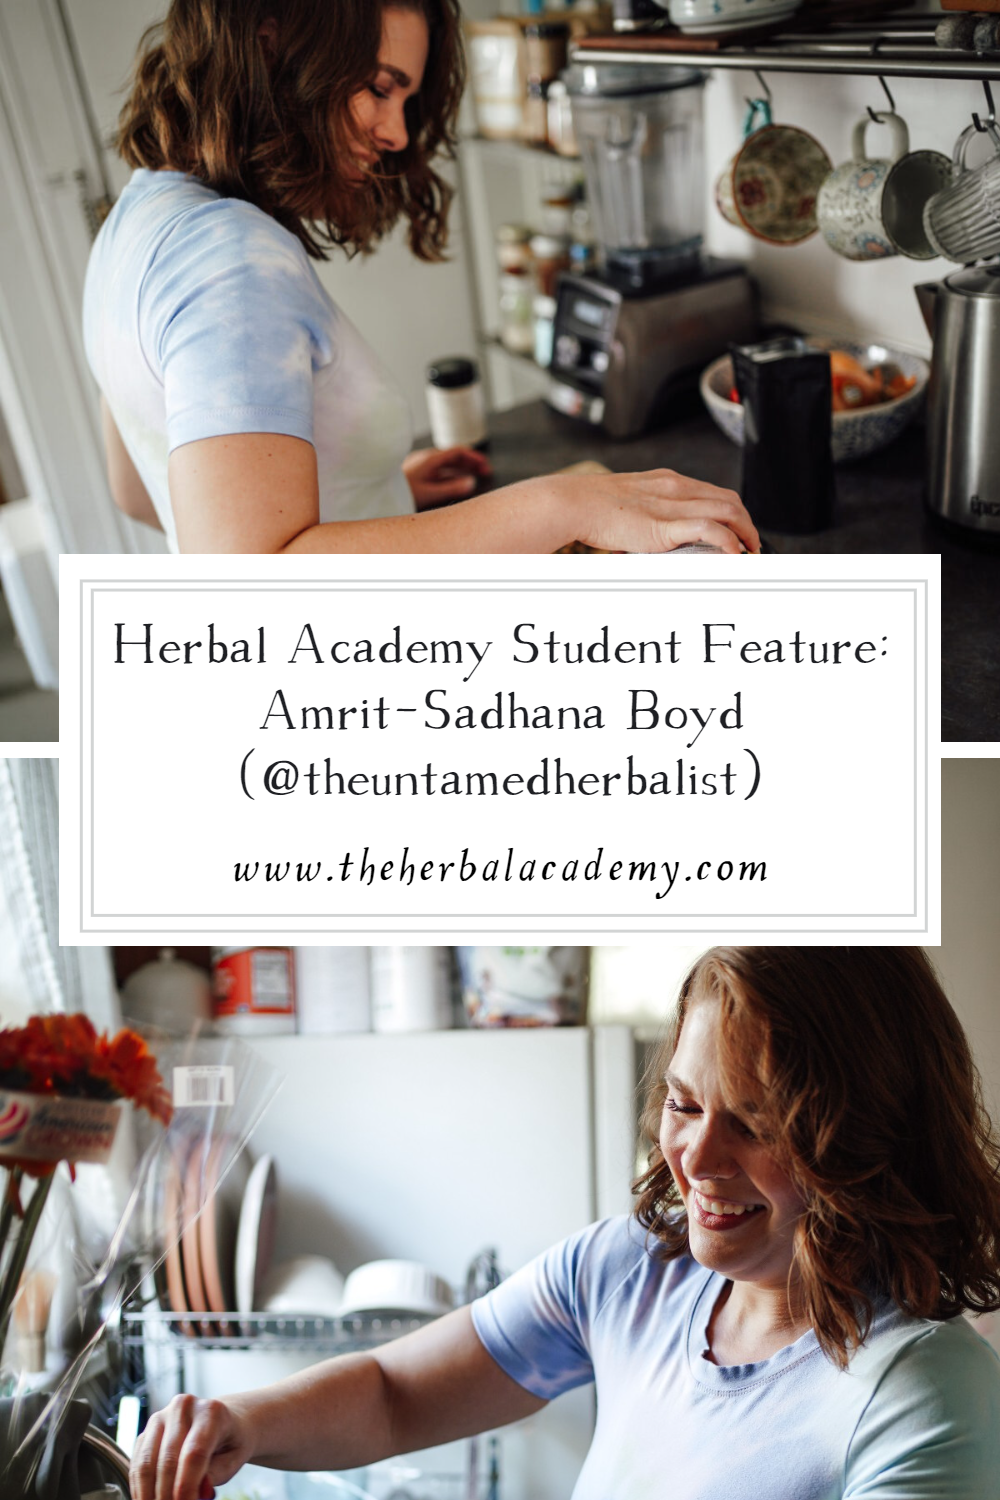 Herbal Academy Student Feature: Amrit-Sadhana Boyd (@theuntamedherbalist) | Herbal Academy | Amrit-Sadhana Boyd, owner of The Untamed Herbalist, is a holistic anxiety coach that helps her clients strengthen their nervous system.